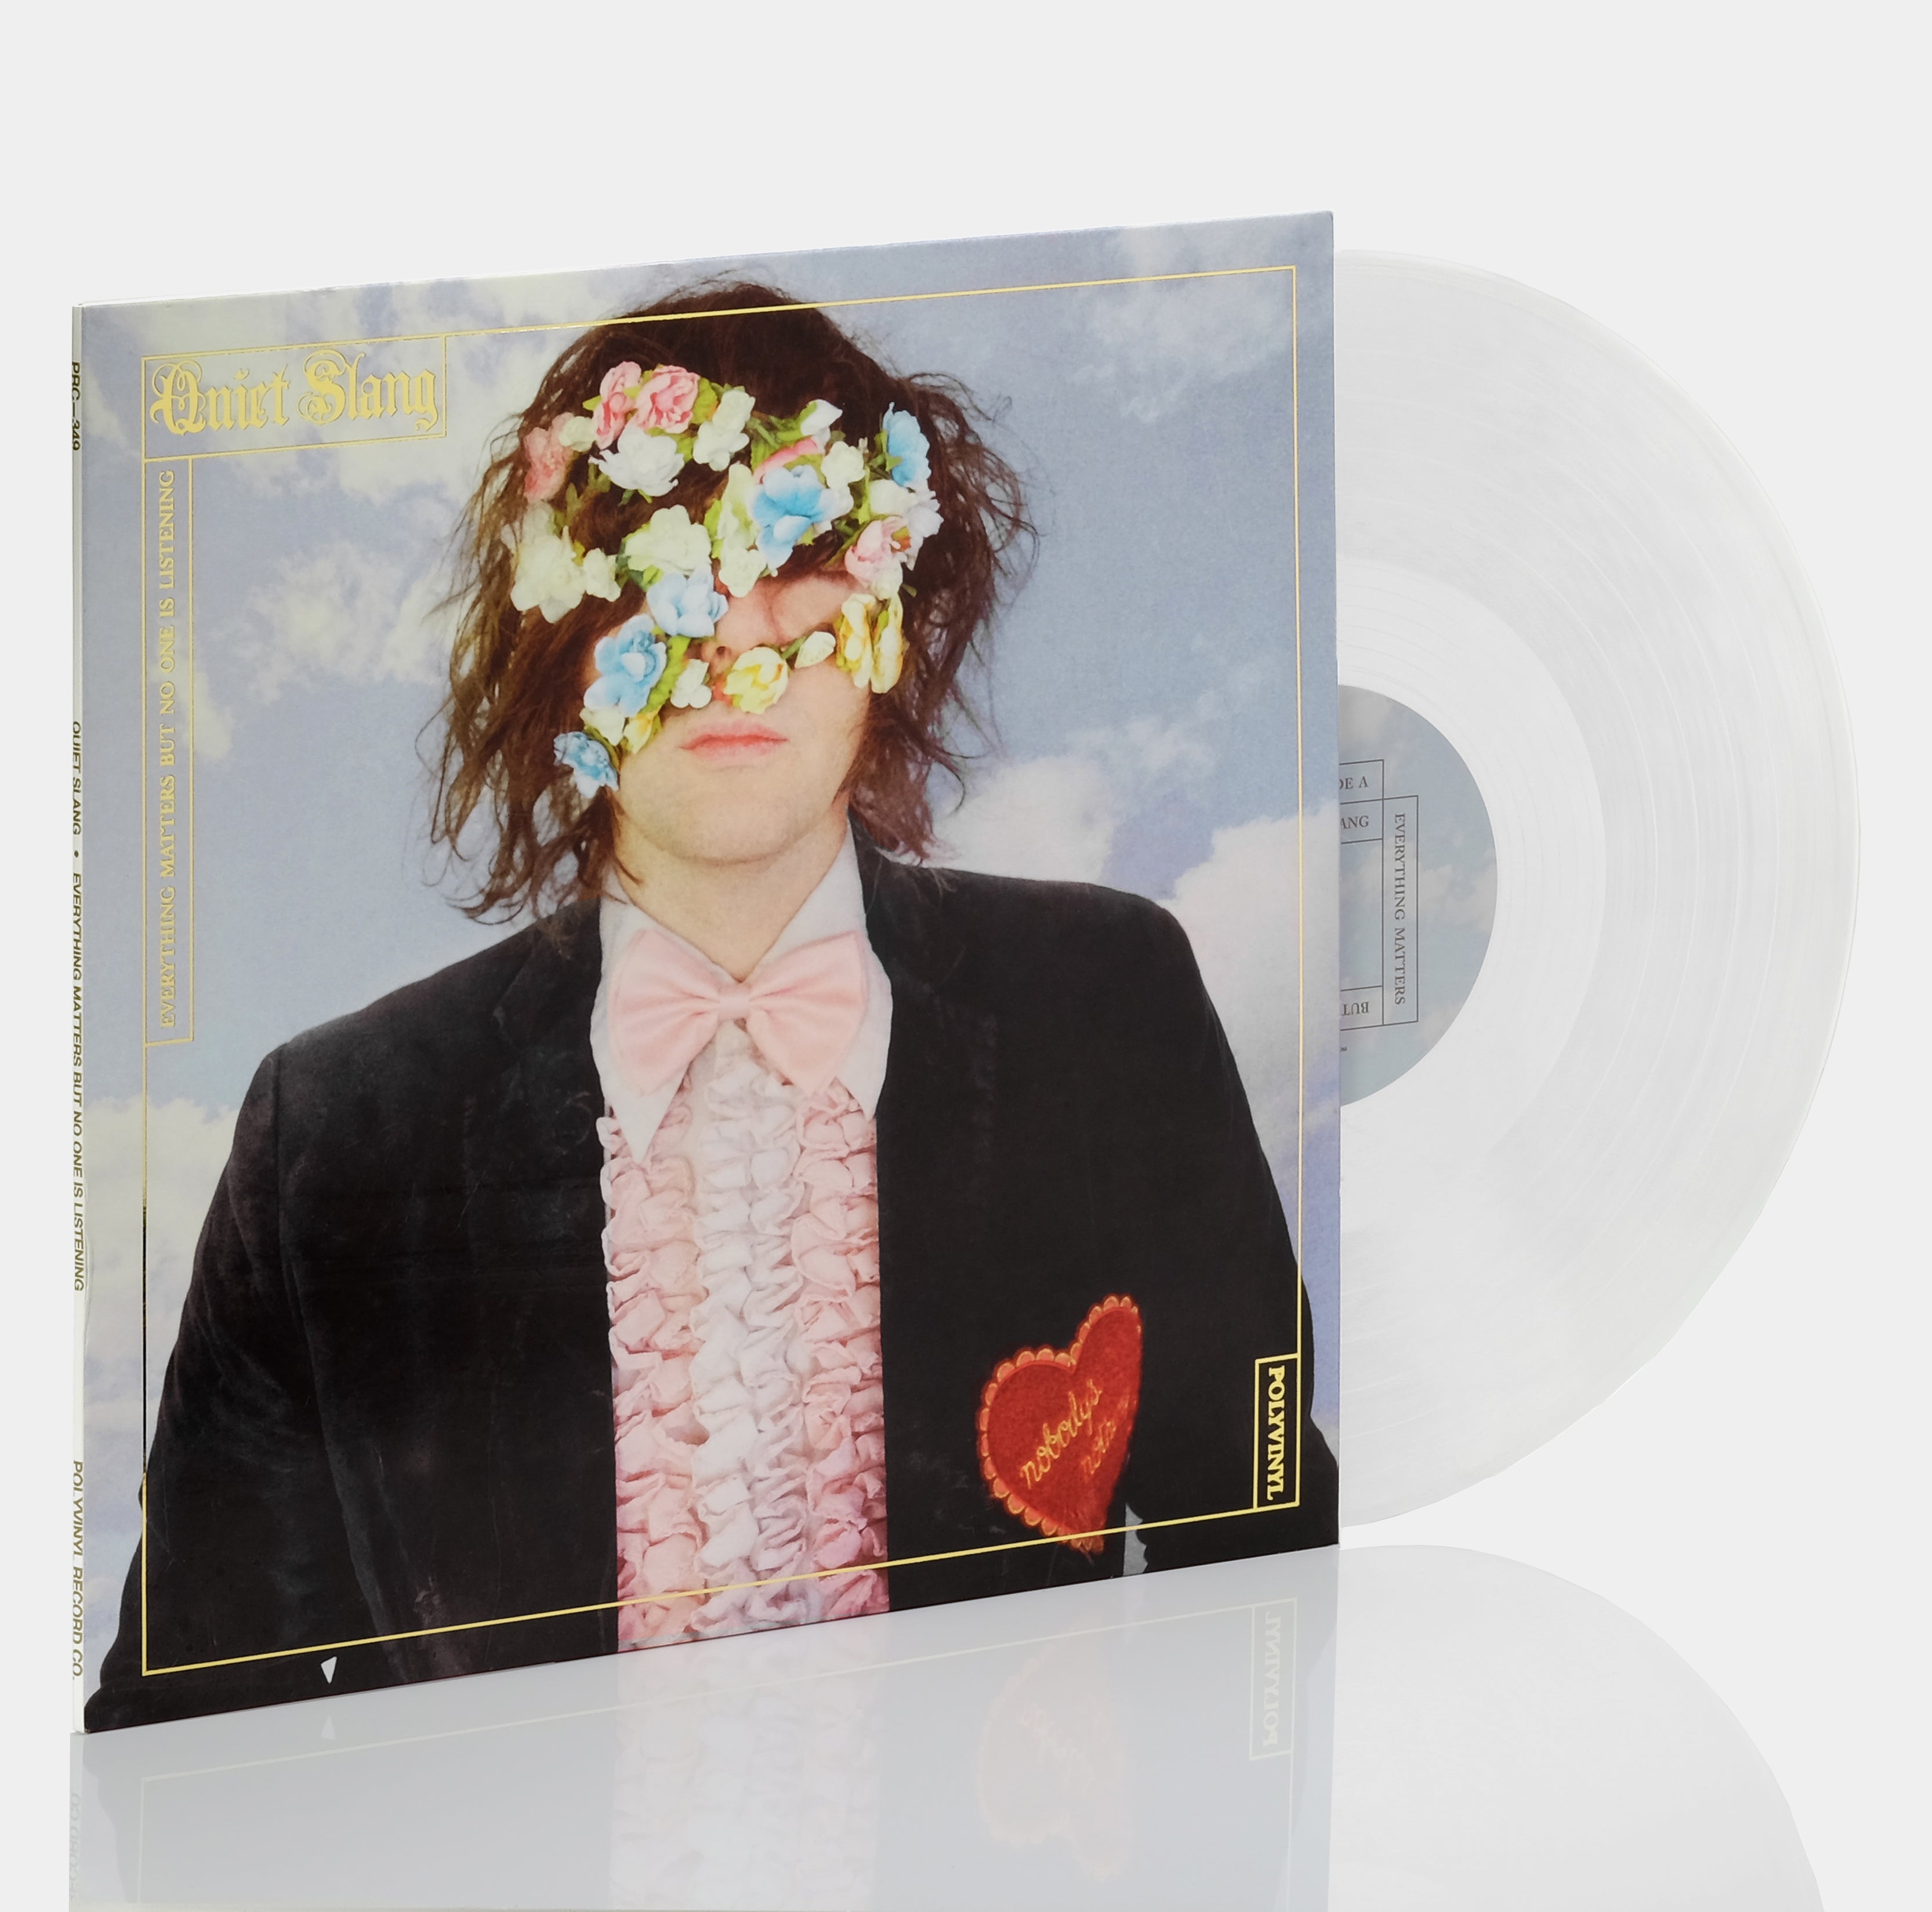 Beach Slang - Everything Matters But No One Is Listening (Quiet Slang) LP Clear Vinyl Record